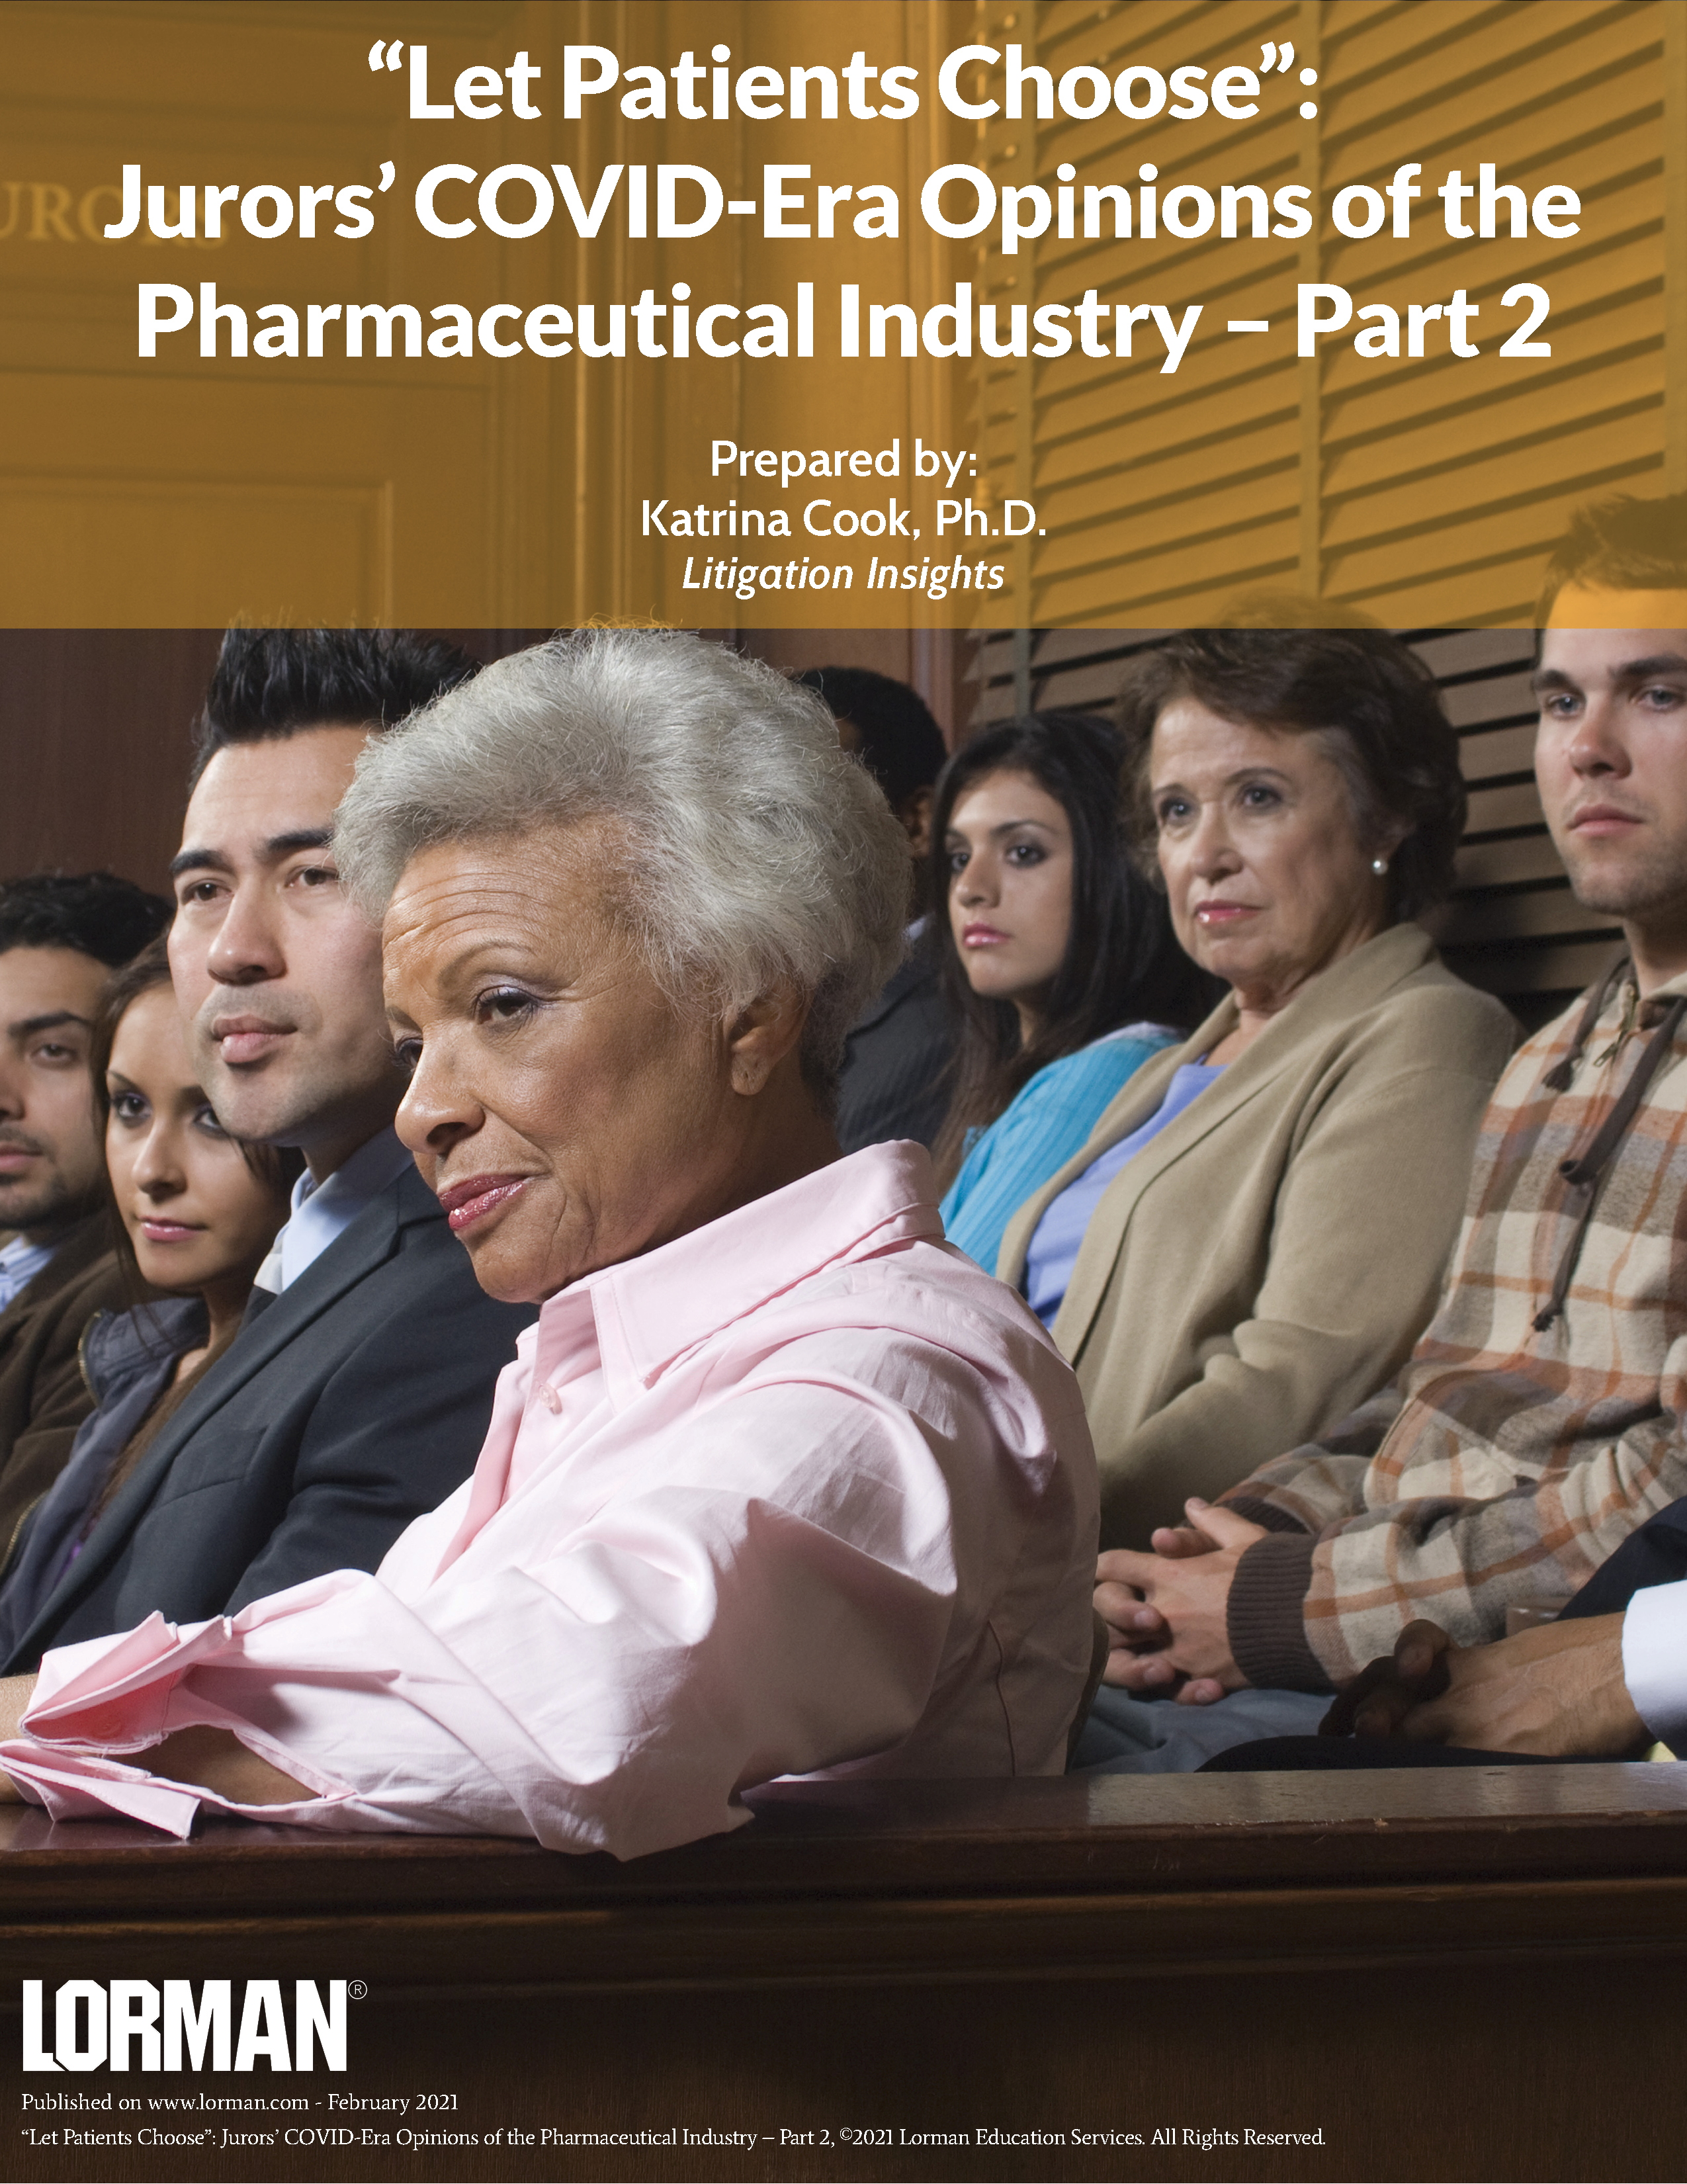 “Let Patients Choose”: Jurors’ COVID-Era Opinions of the Pharmaceutical Industry – Part 2